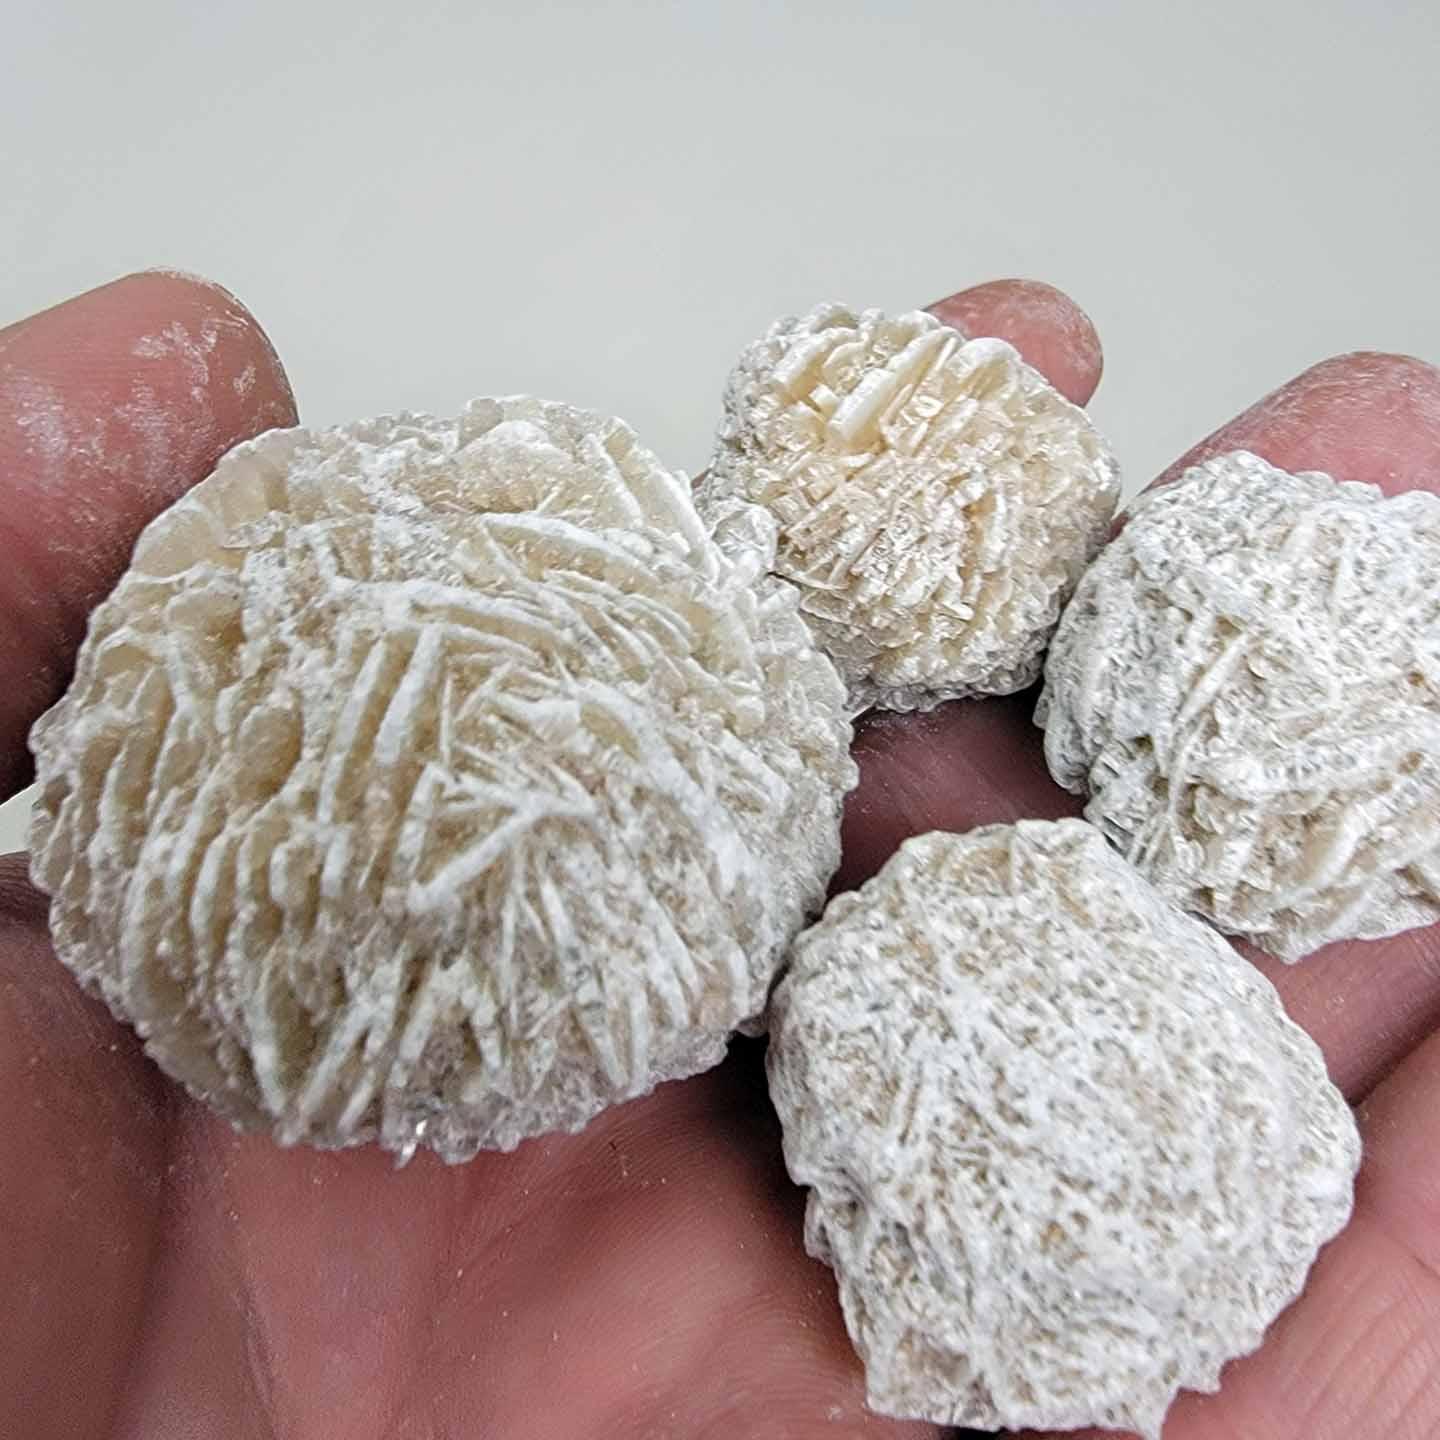 FIVE Mexican Desert Rose Selenite Crystal Formation! - LapidaryCentral